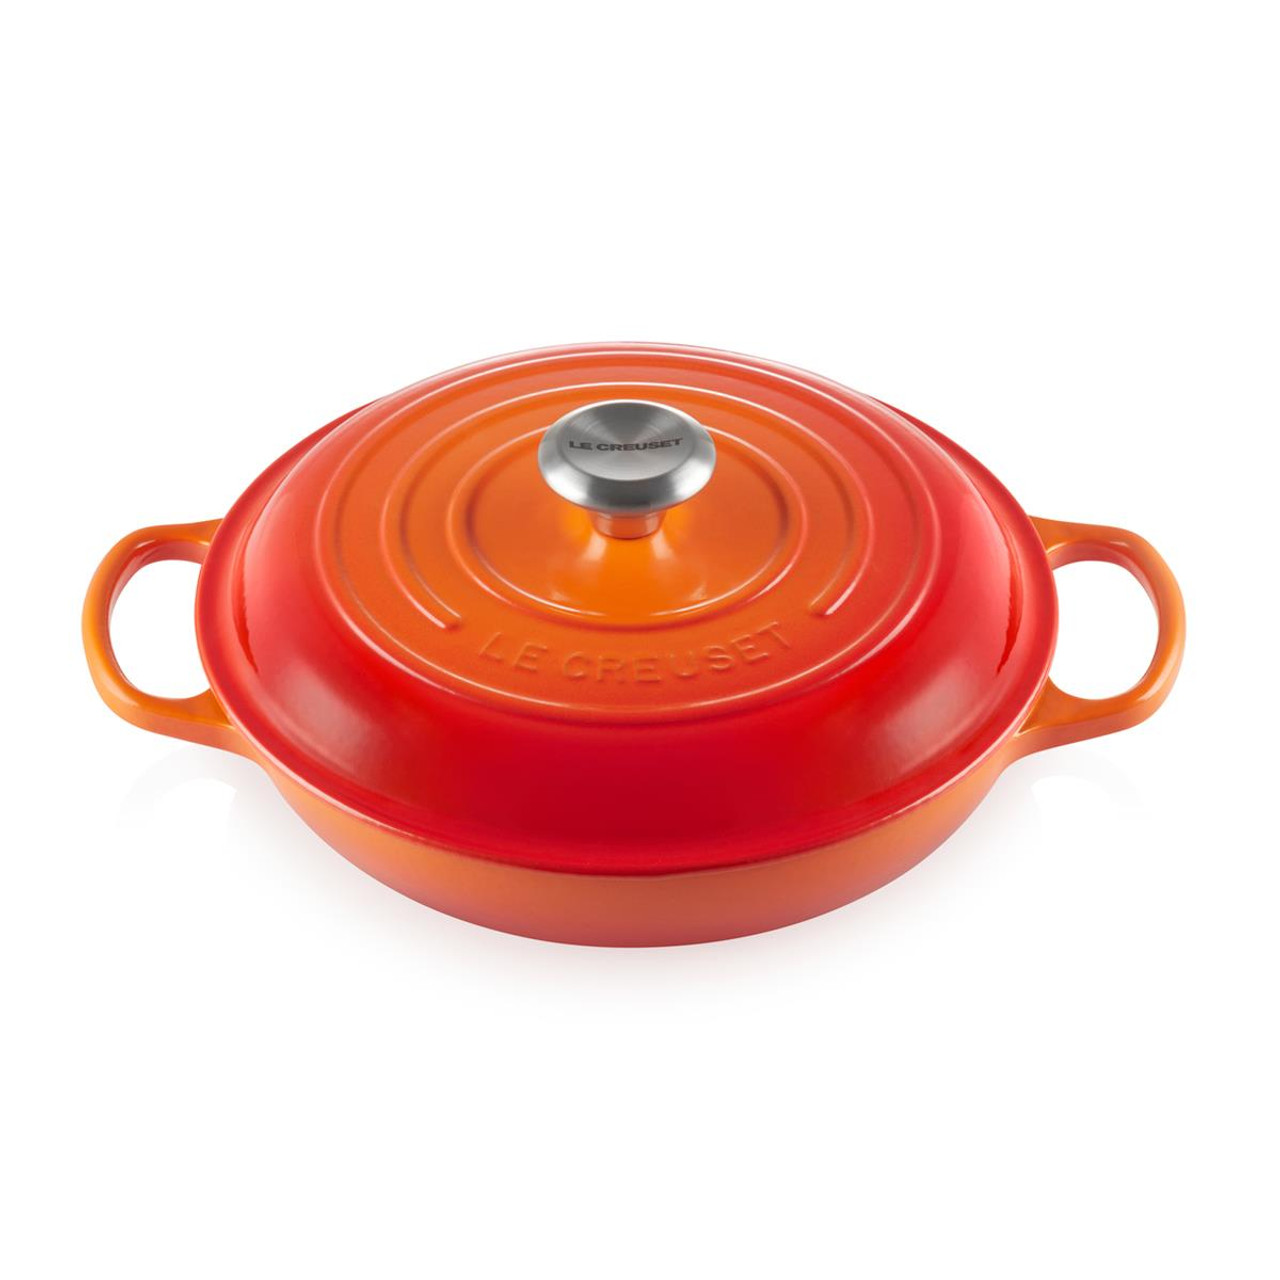 What is the diameter of the 26cm Le Creuset cast iron casserole dish?